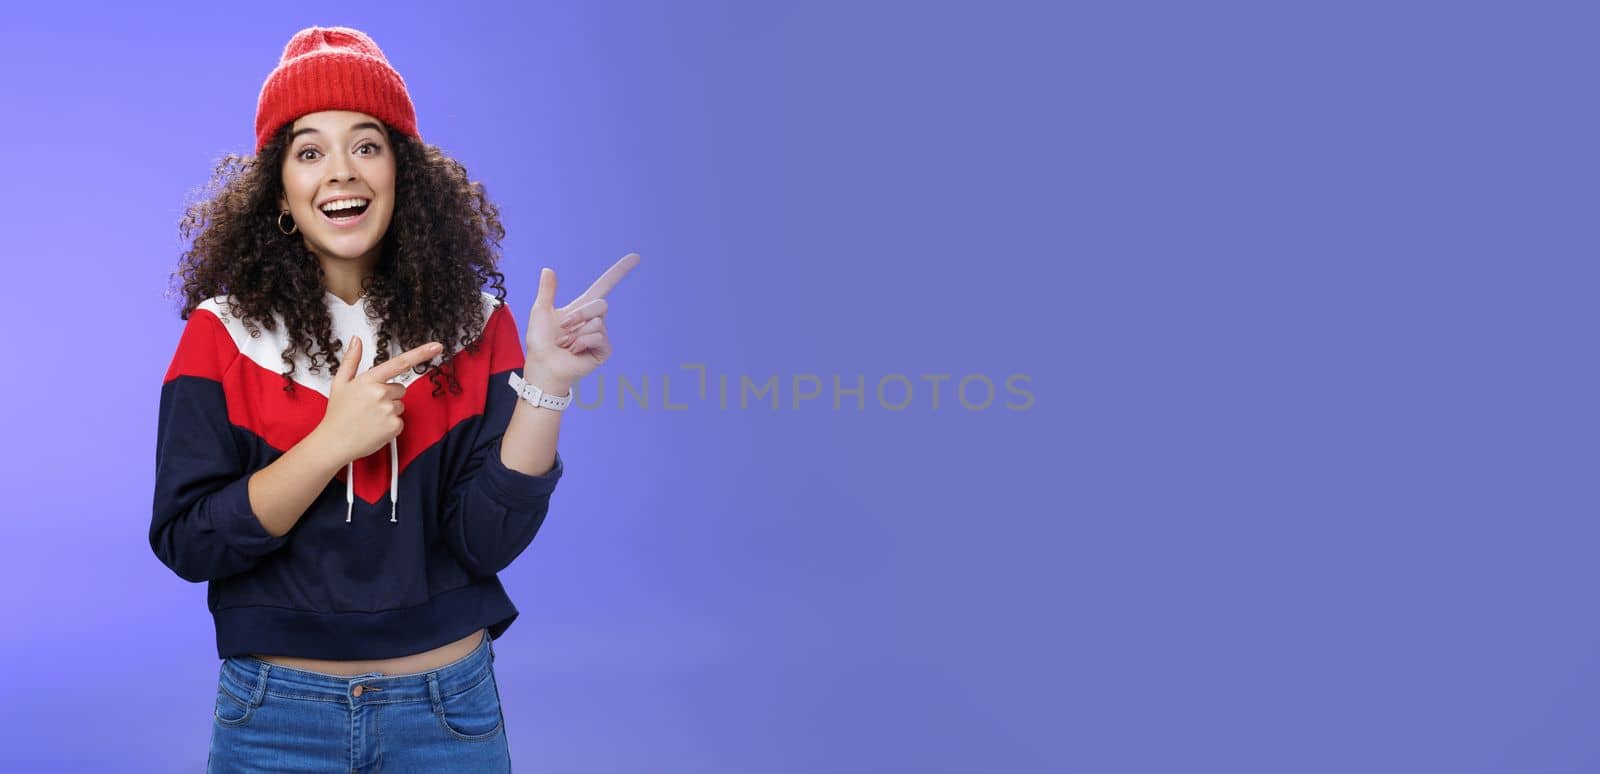 Lifestyle. Enthusiastic friendly-looking attractive young 20s woman with curly hair in warm beanie and sweatshirt smiling open mouth amazed and delighted as pointing at upper right corner over blue background.